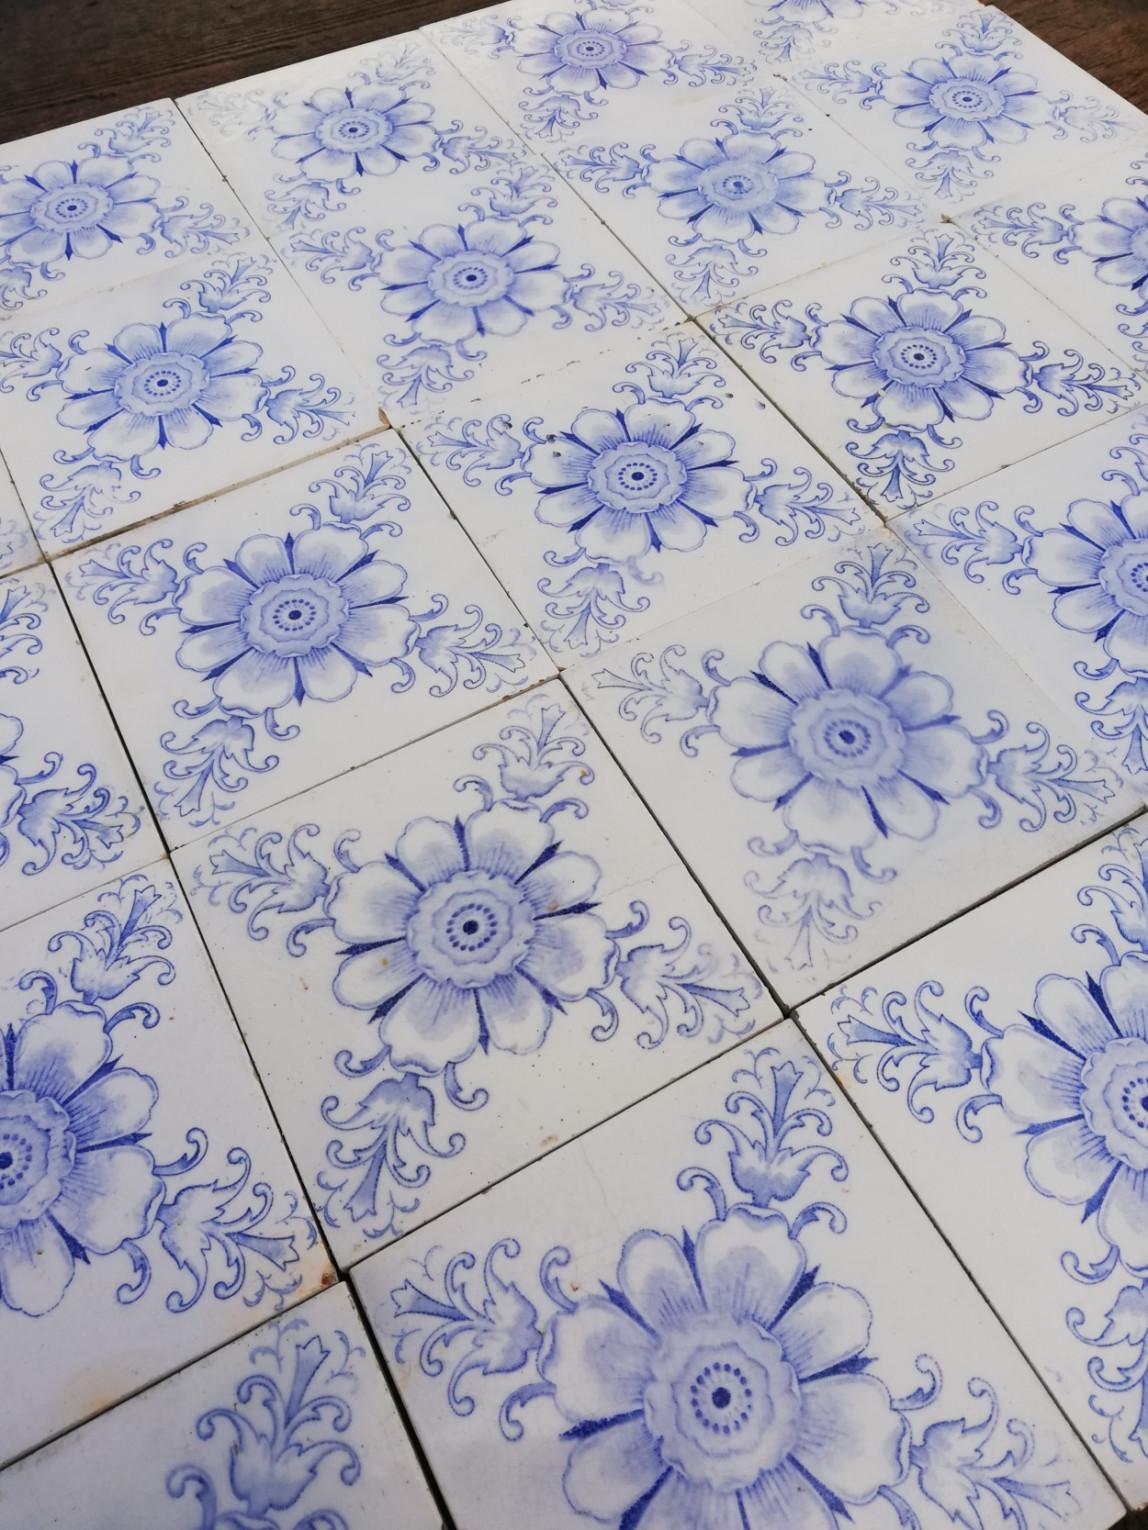 White and Blue Flower Art Deco Glazed Tiles by Le Glaive, 1920 For Sale 2